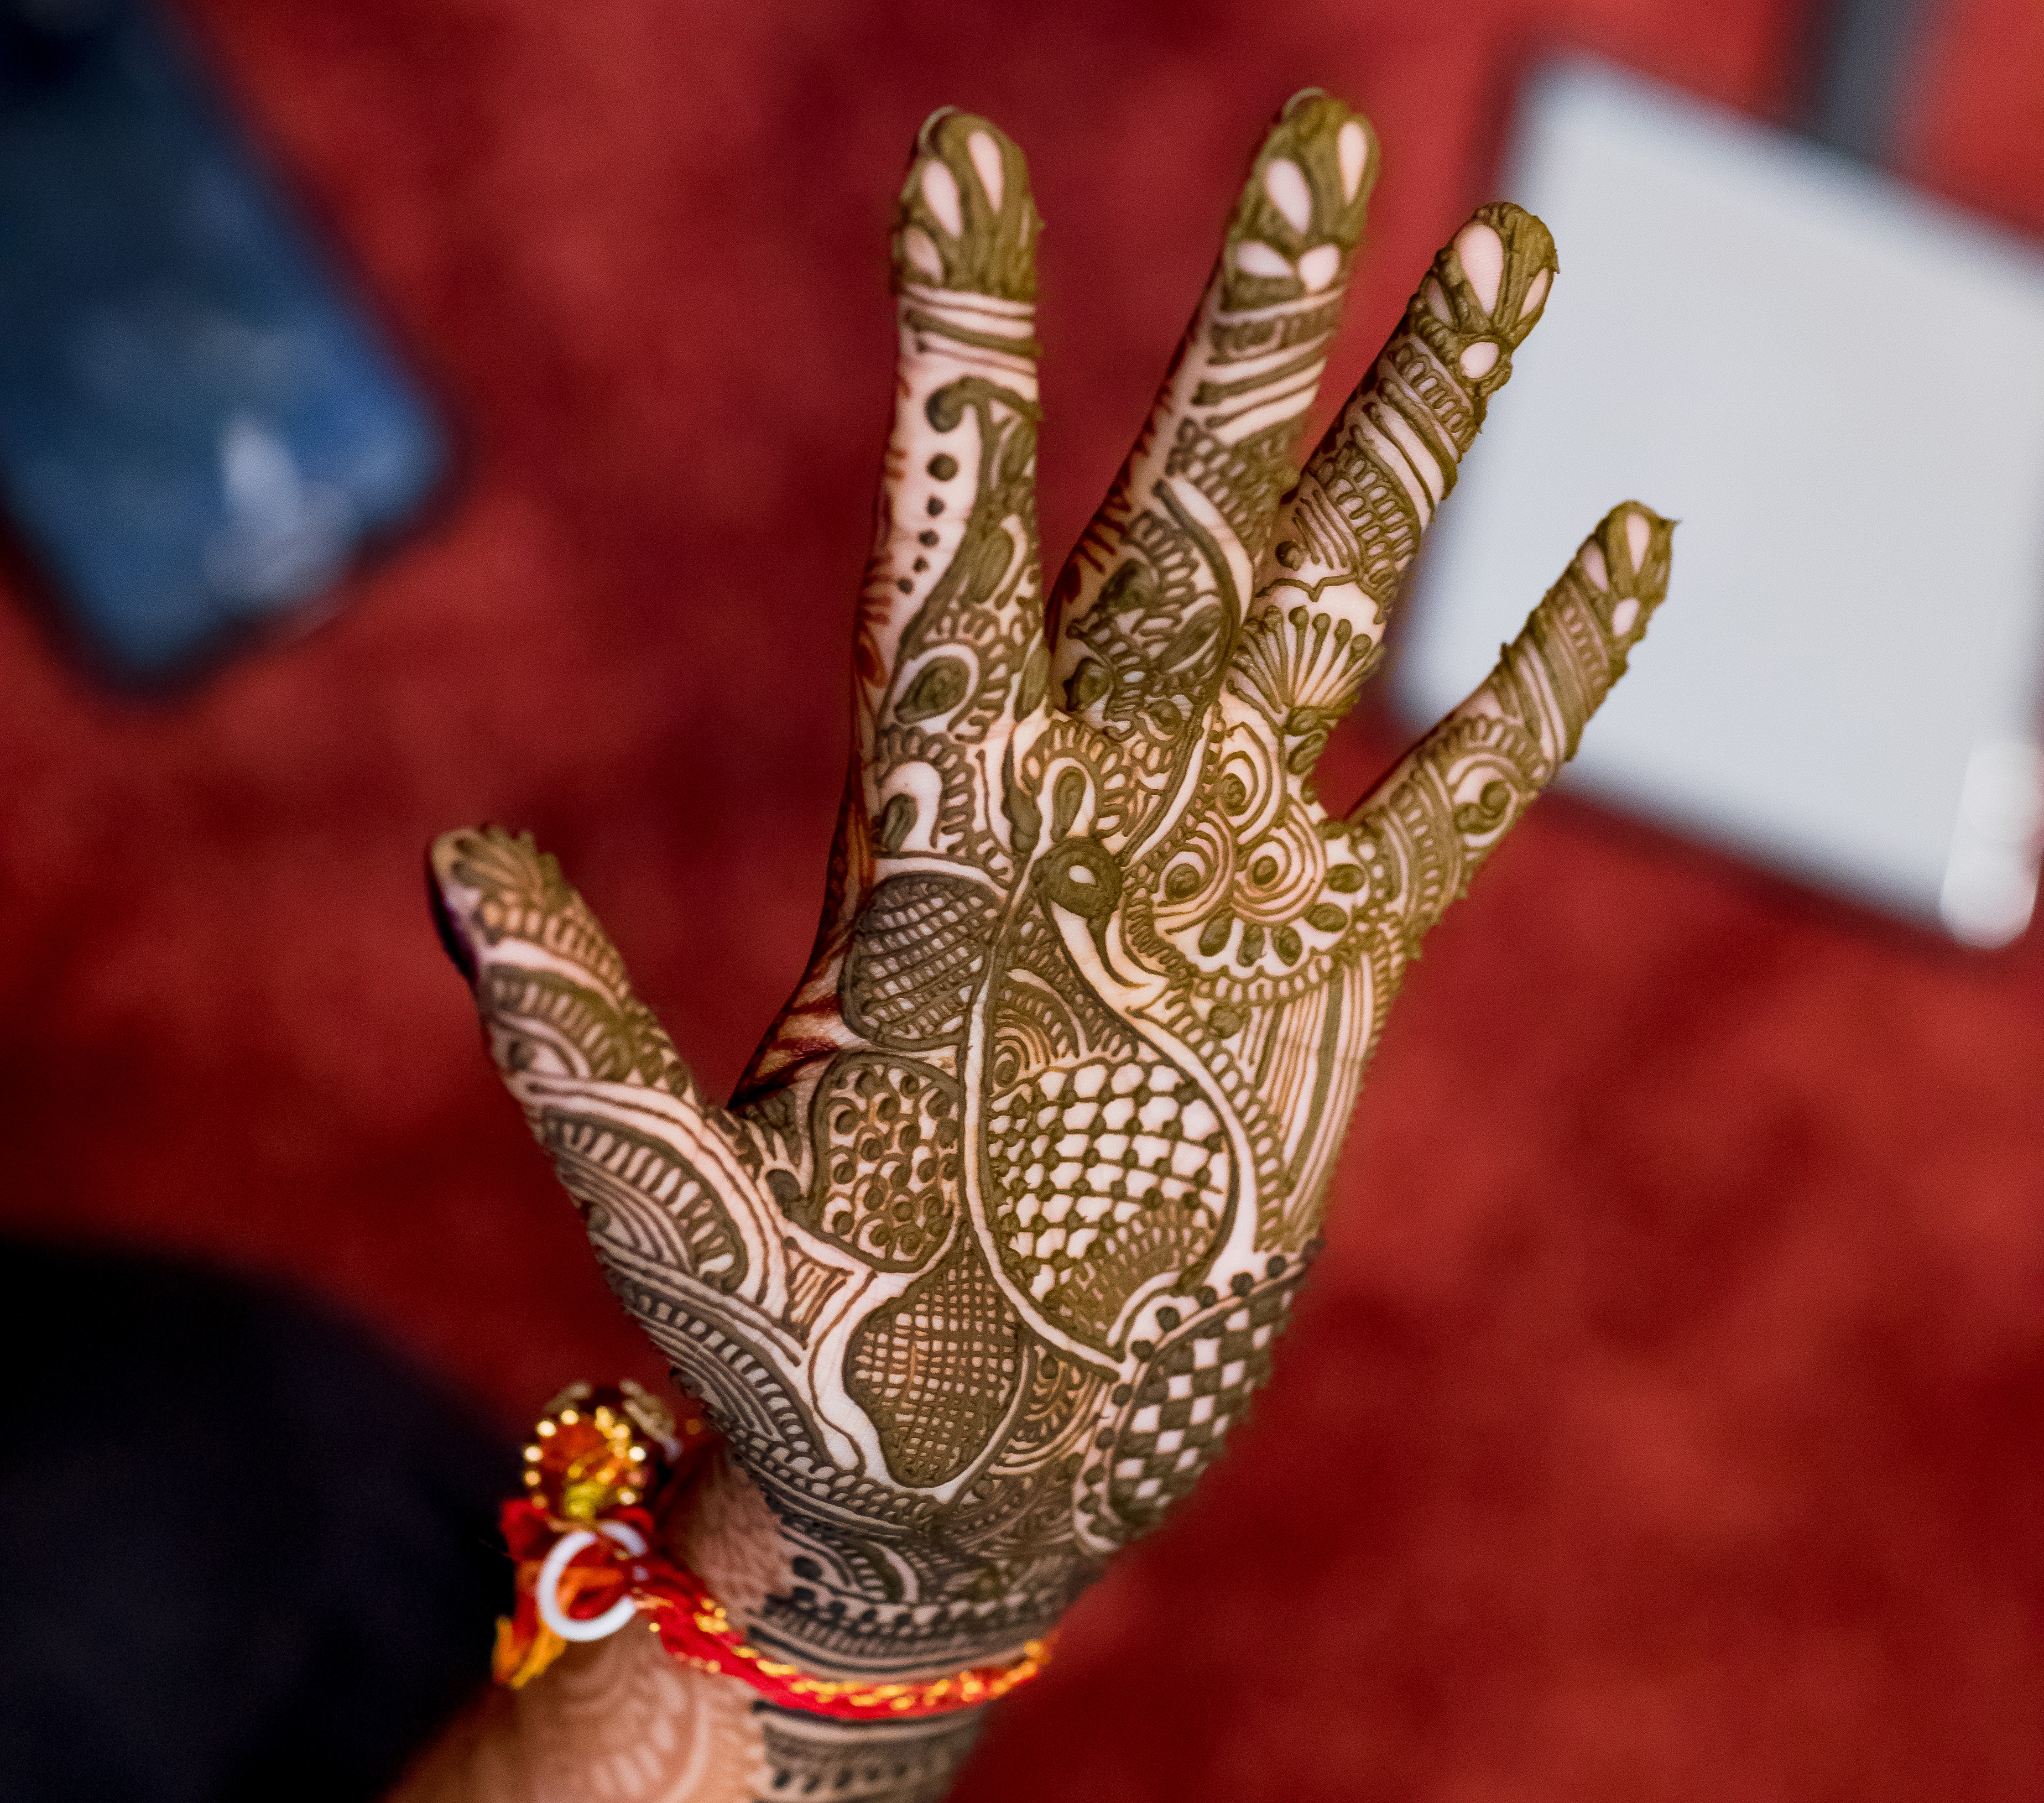 Indian weddings begin with seven days of pre-wedding rituals. The first night is Mehndi, or henna, night when red mehndi stain is applied to the bride’s hands and feet in elaborate designs.
